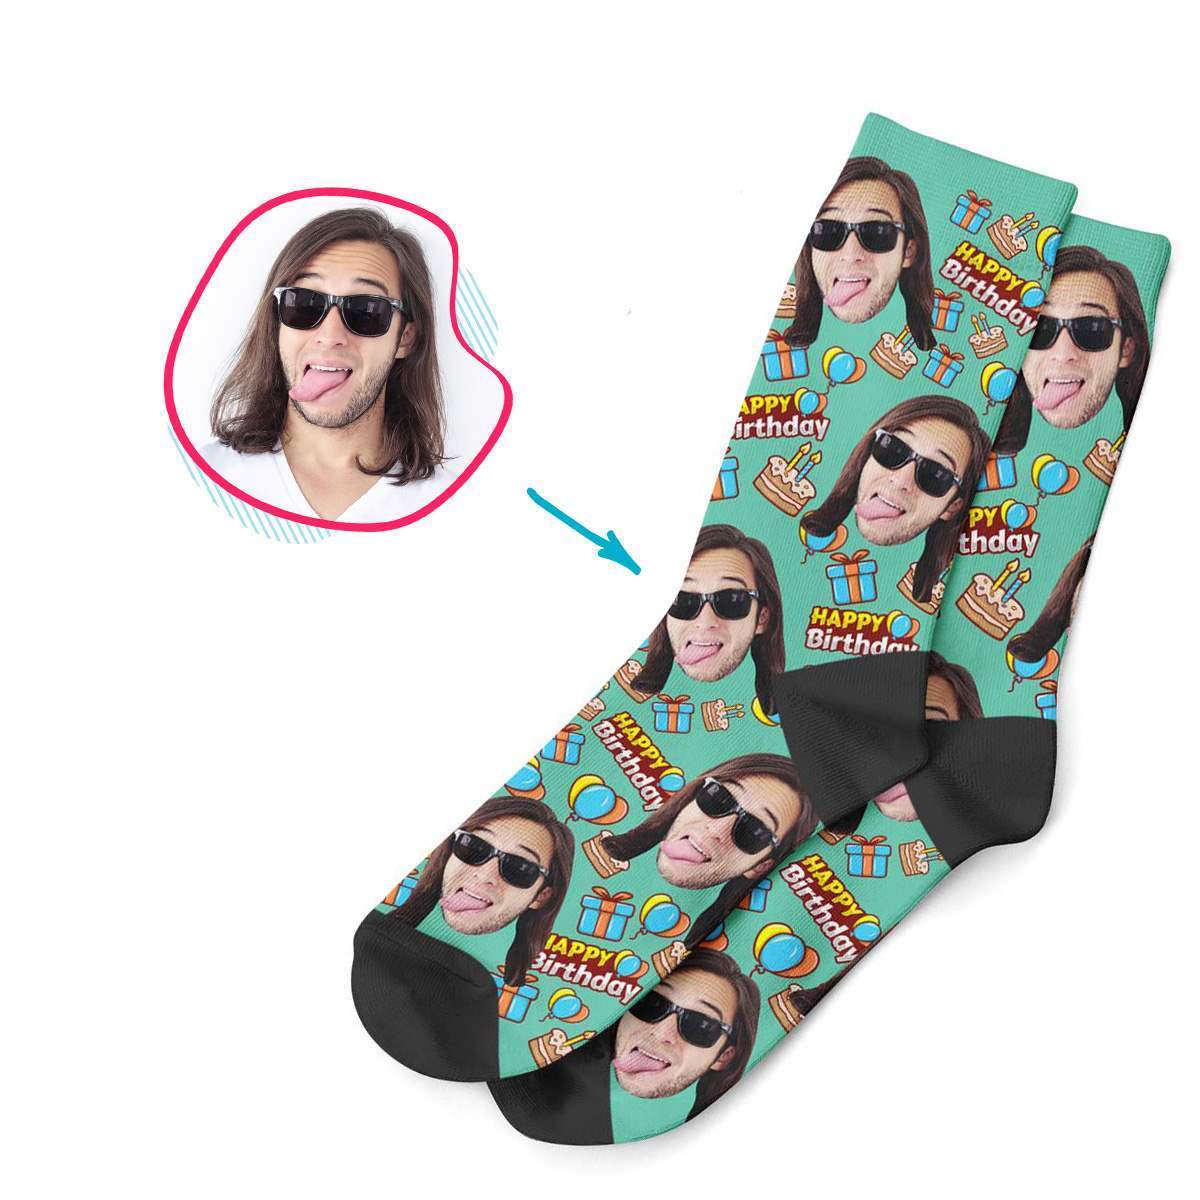 mint Birthday socks personalized with photo of face printed on them